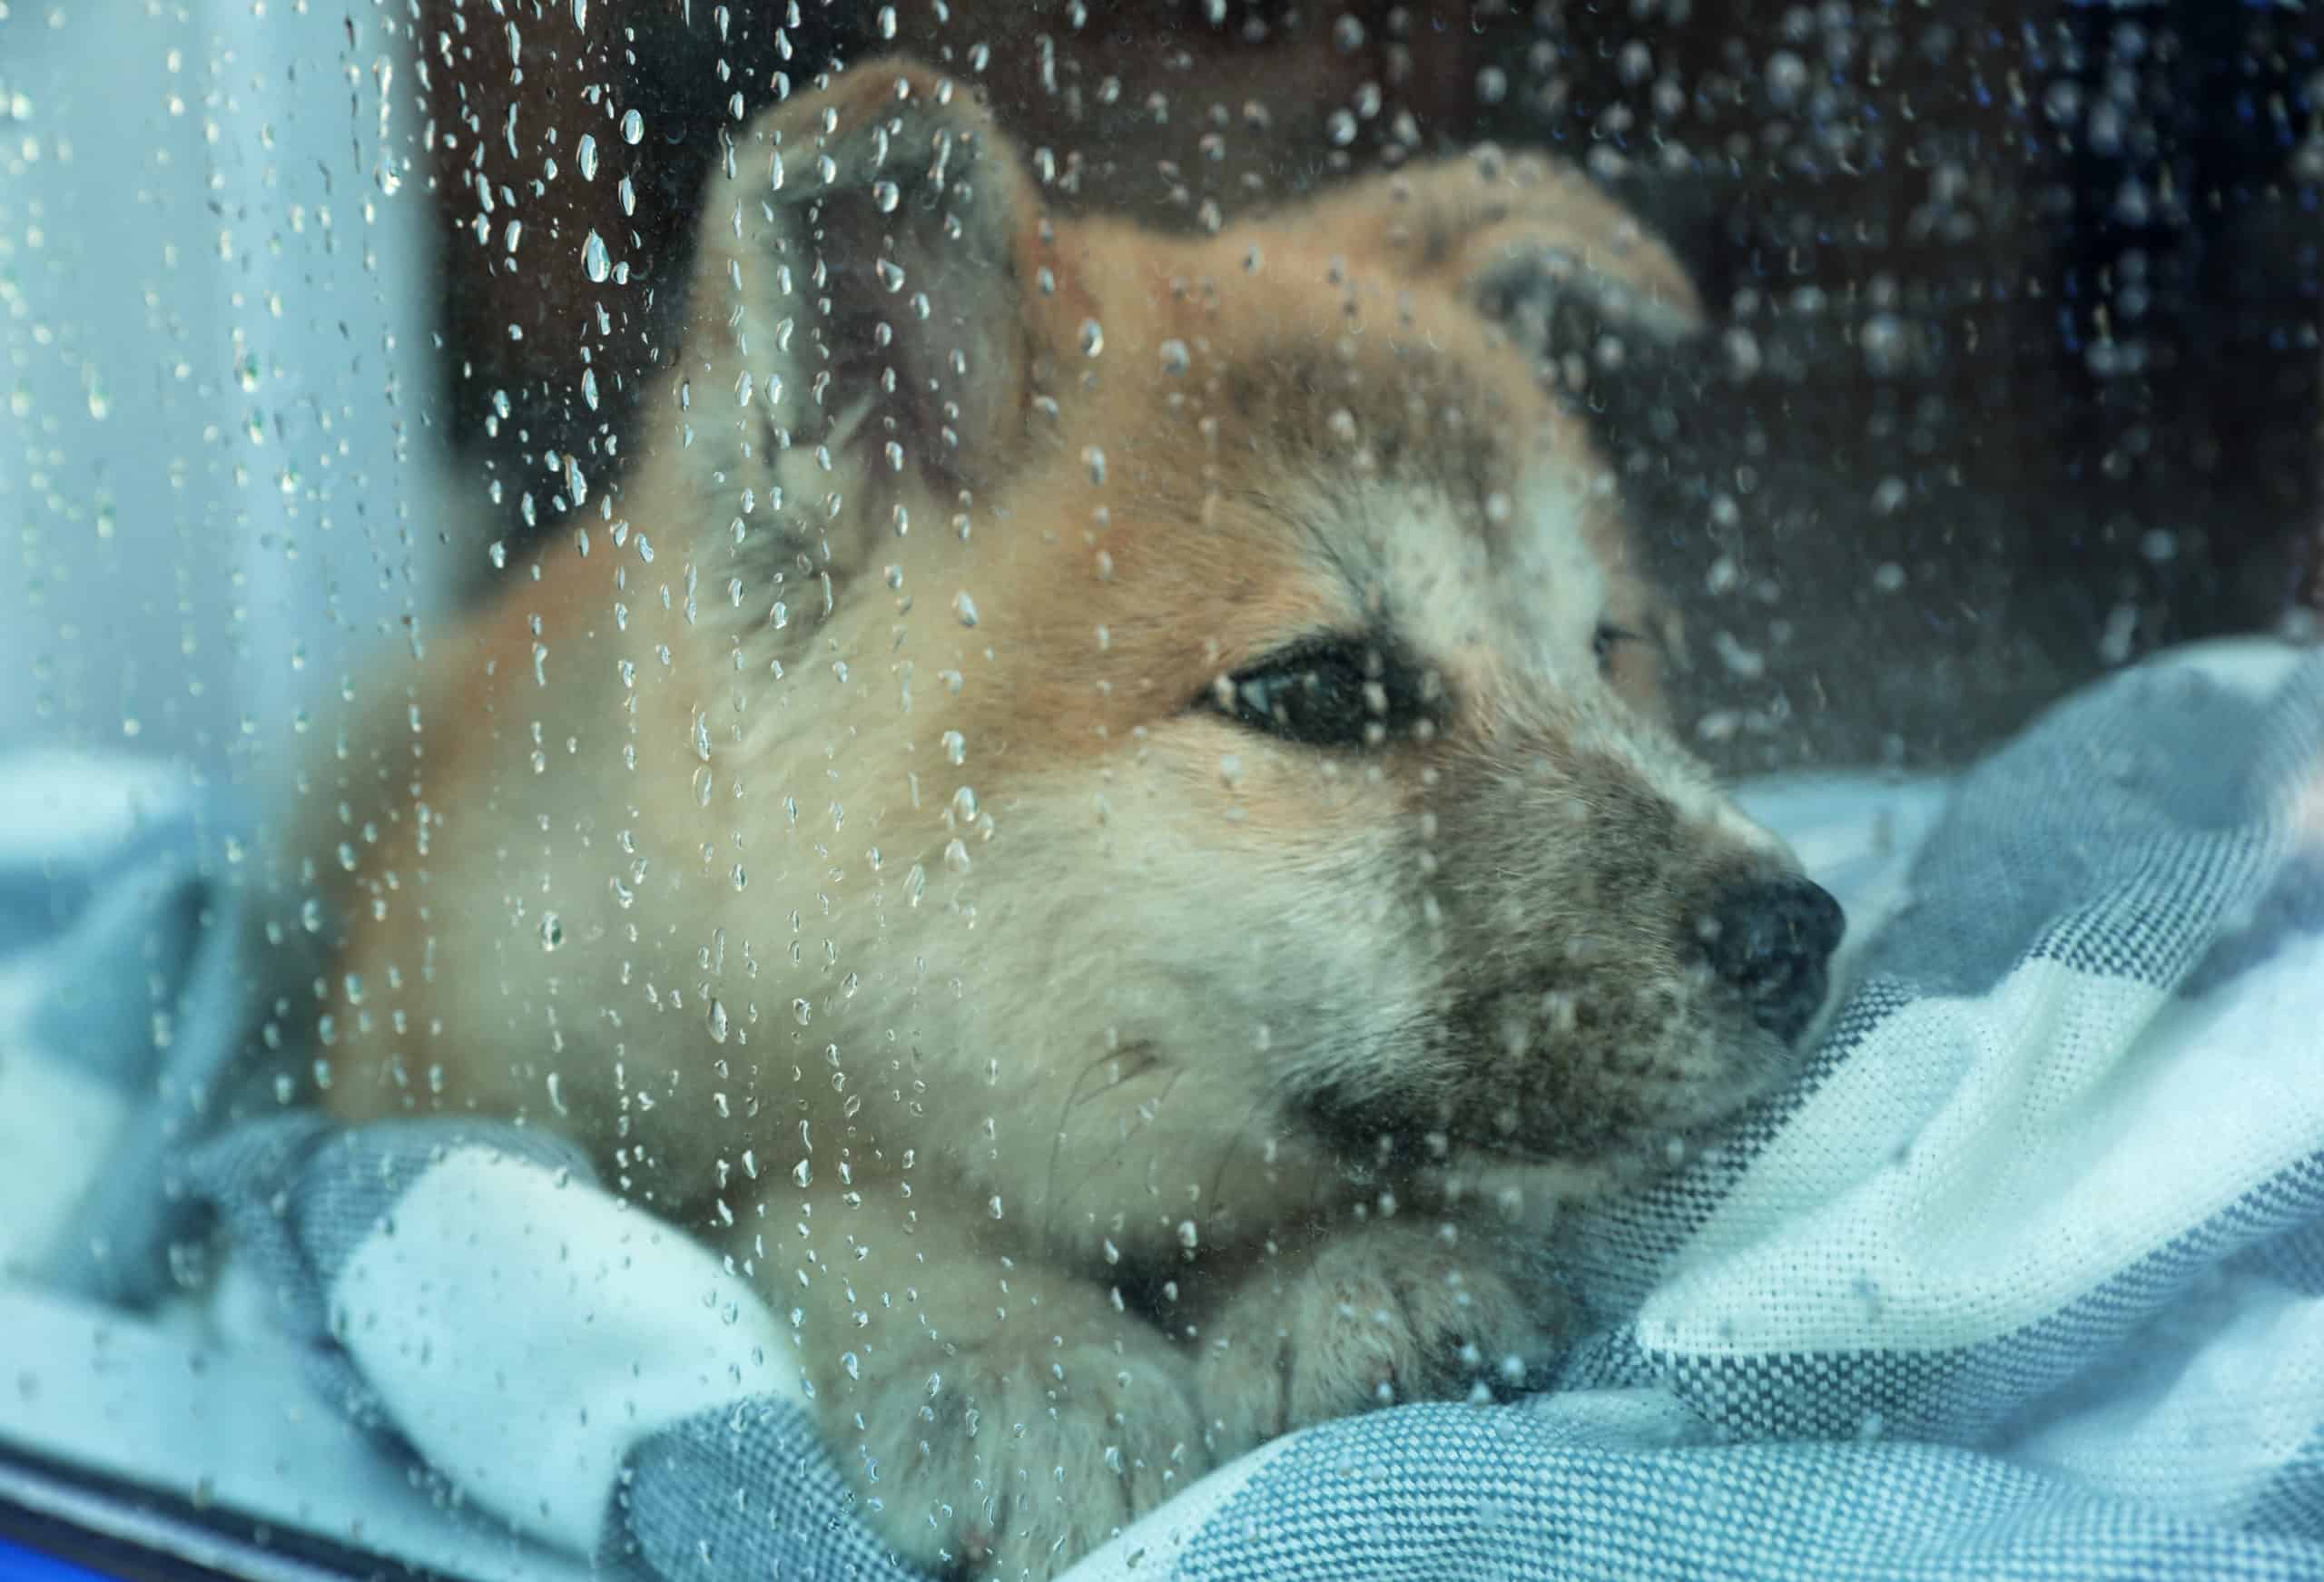 Why does my dog act weird when it rains?